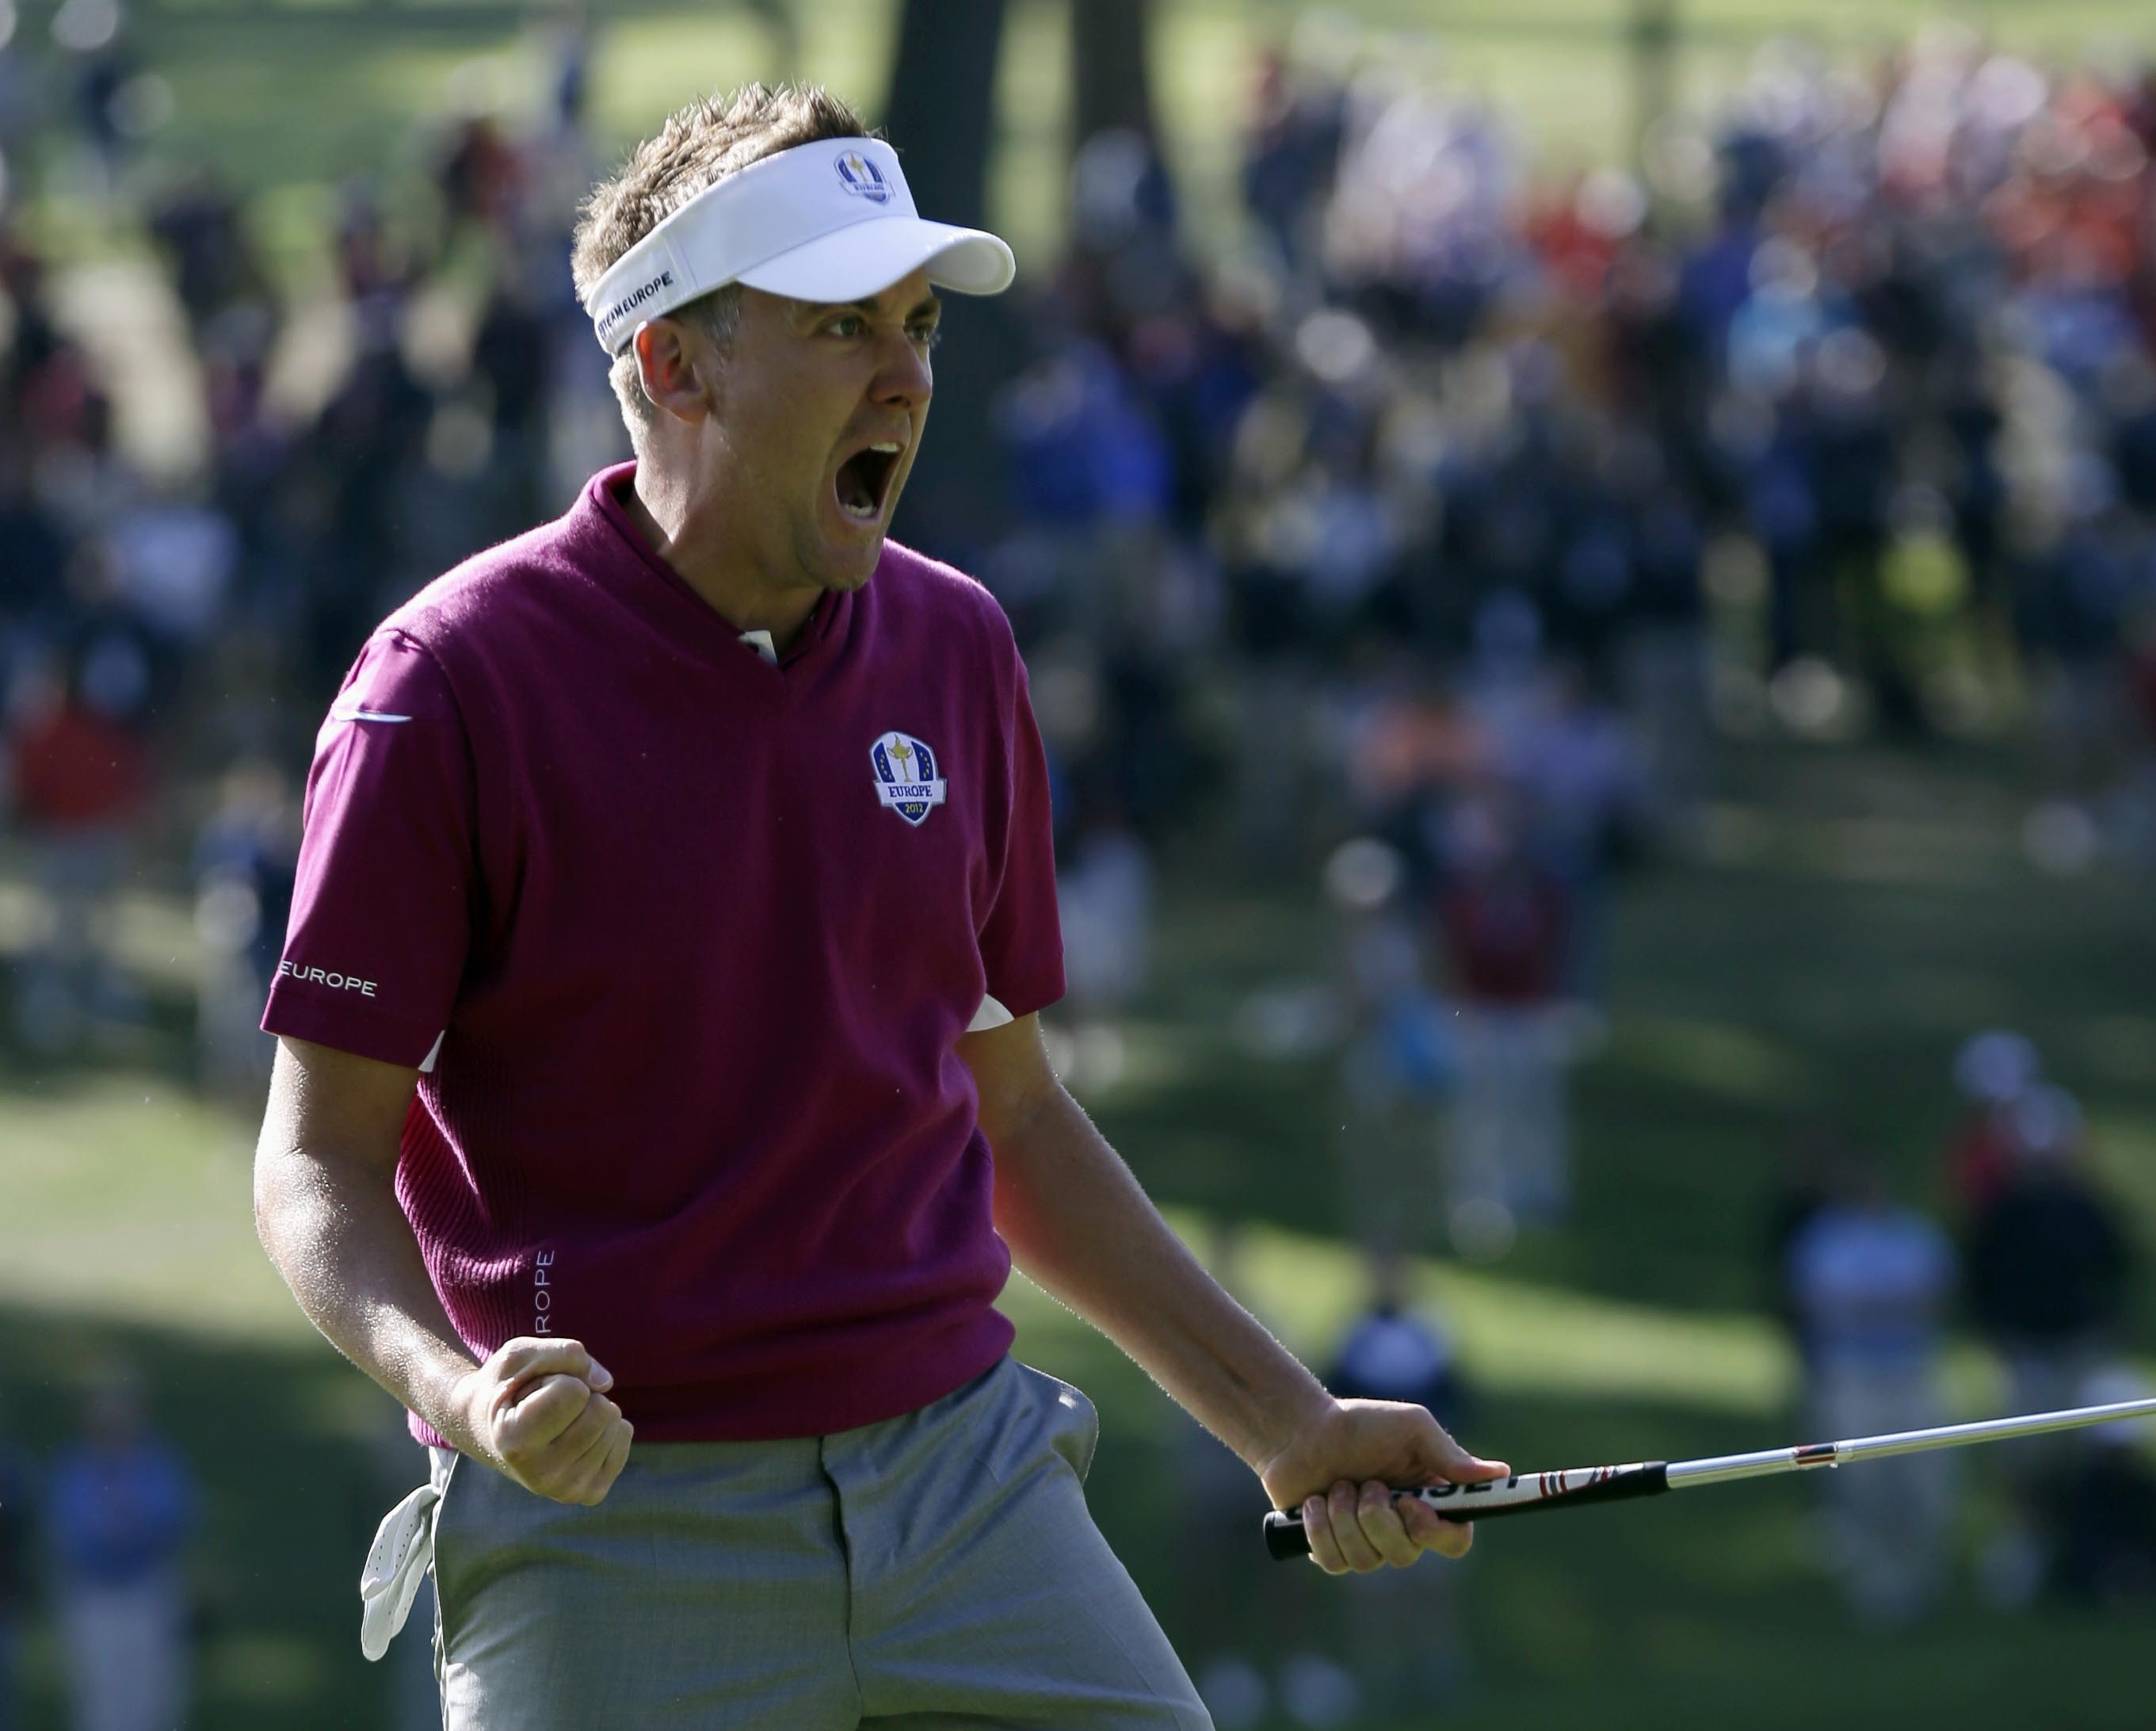 England's Ian Poulter has a remarkable record in the Ryder Cup, winning 12 out of 15 singles. Photo: AP